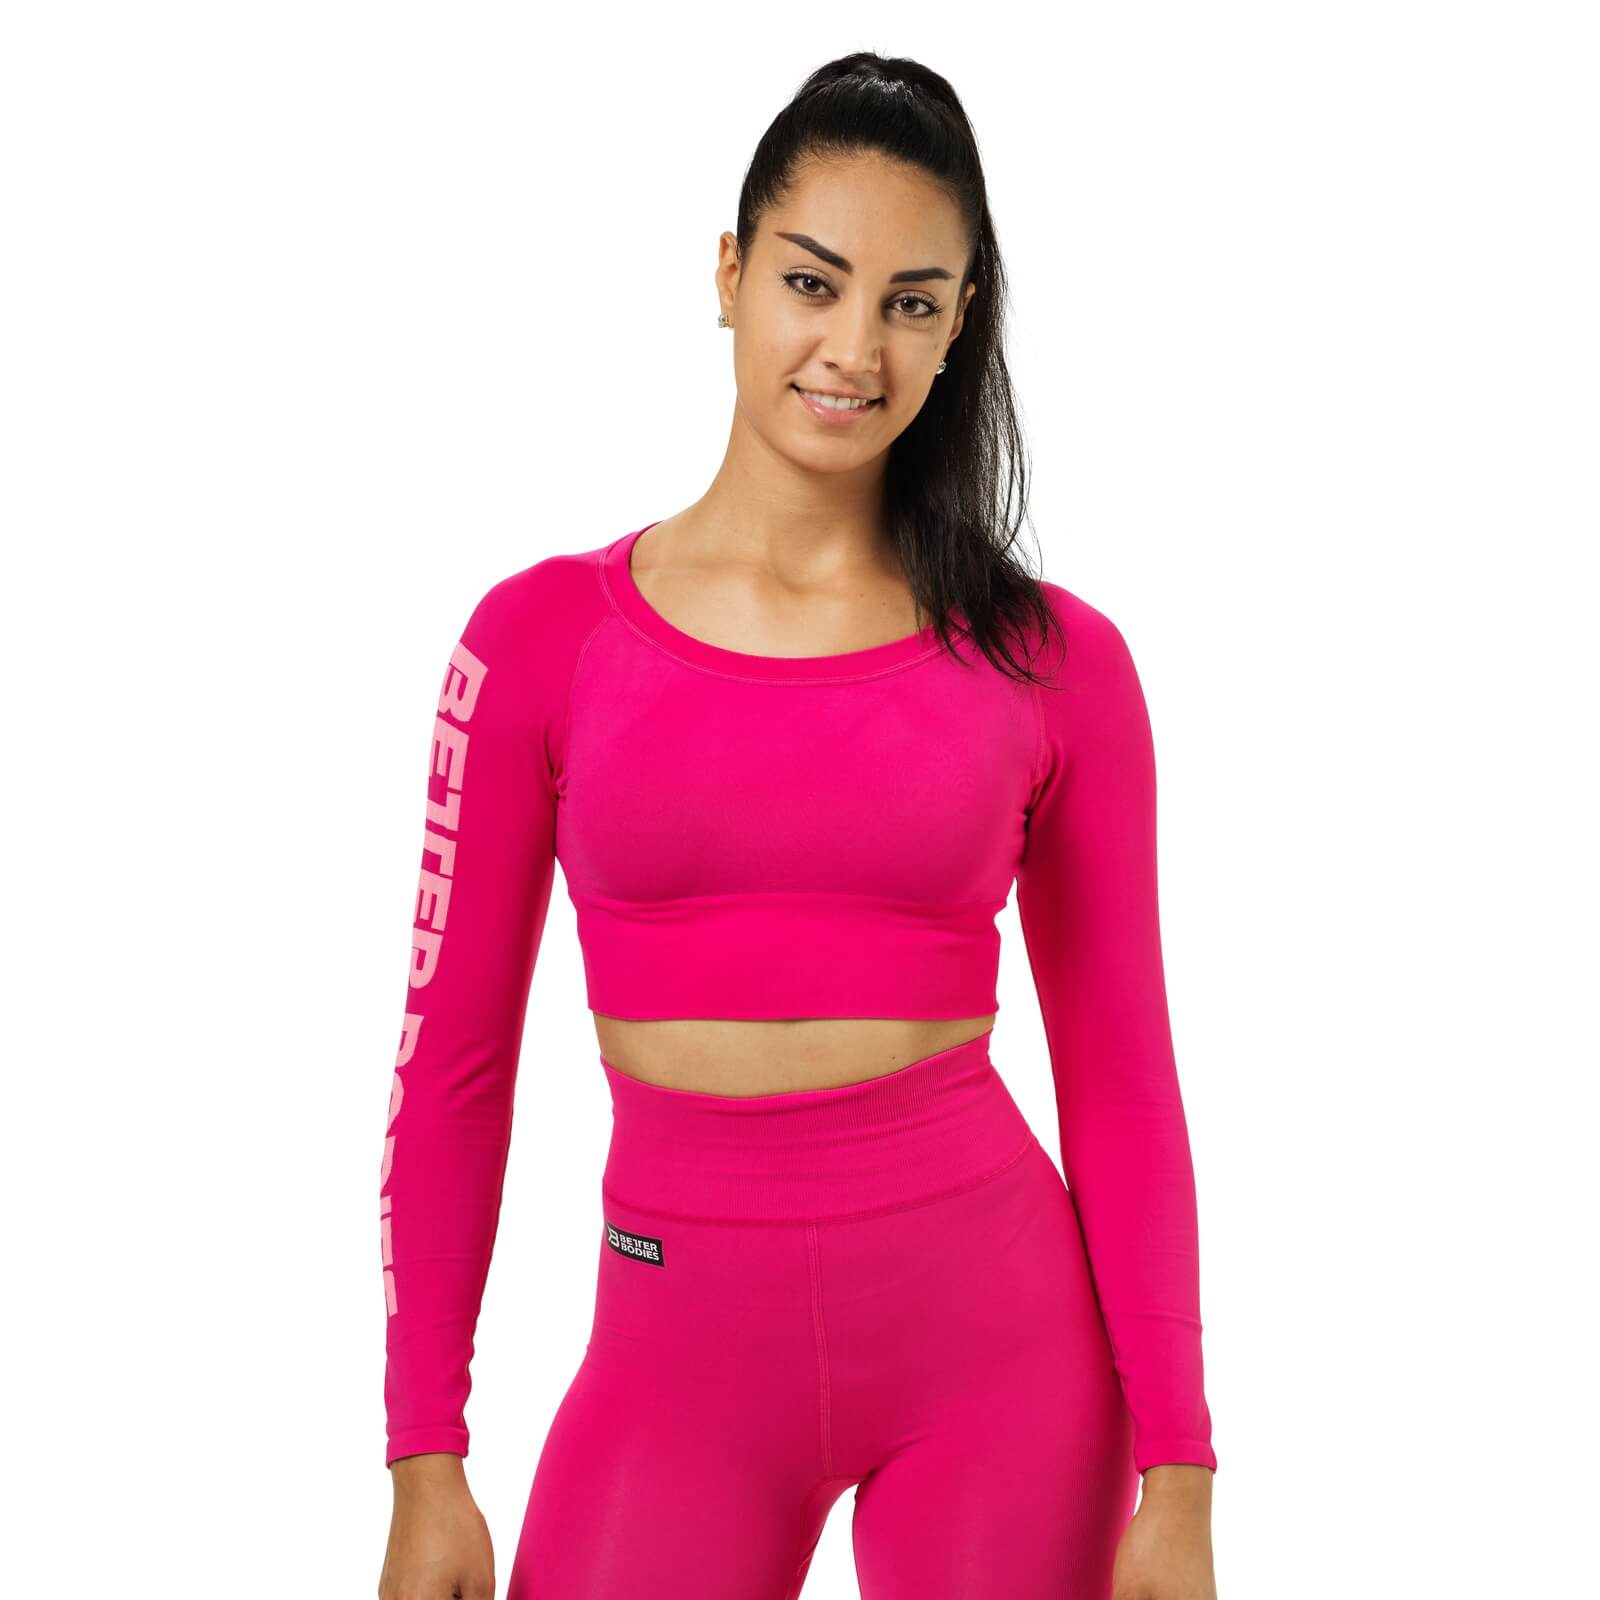 Bowery Cropped Ls, hot pink, Better Bodies